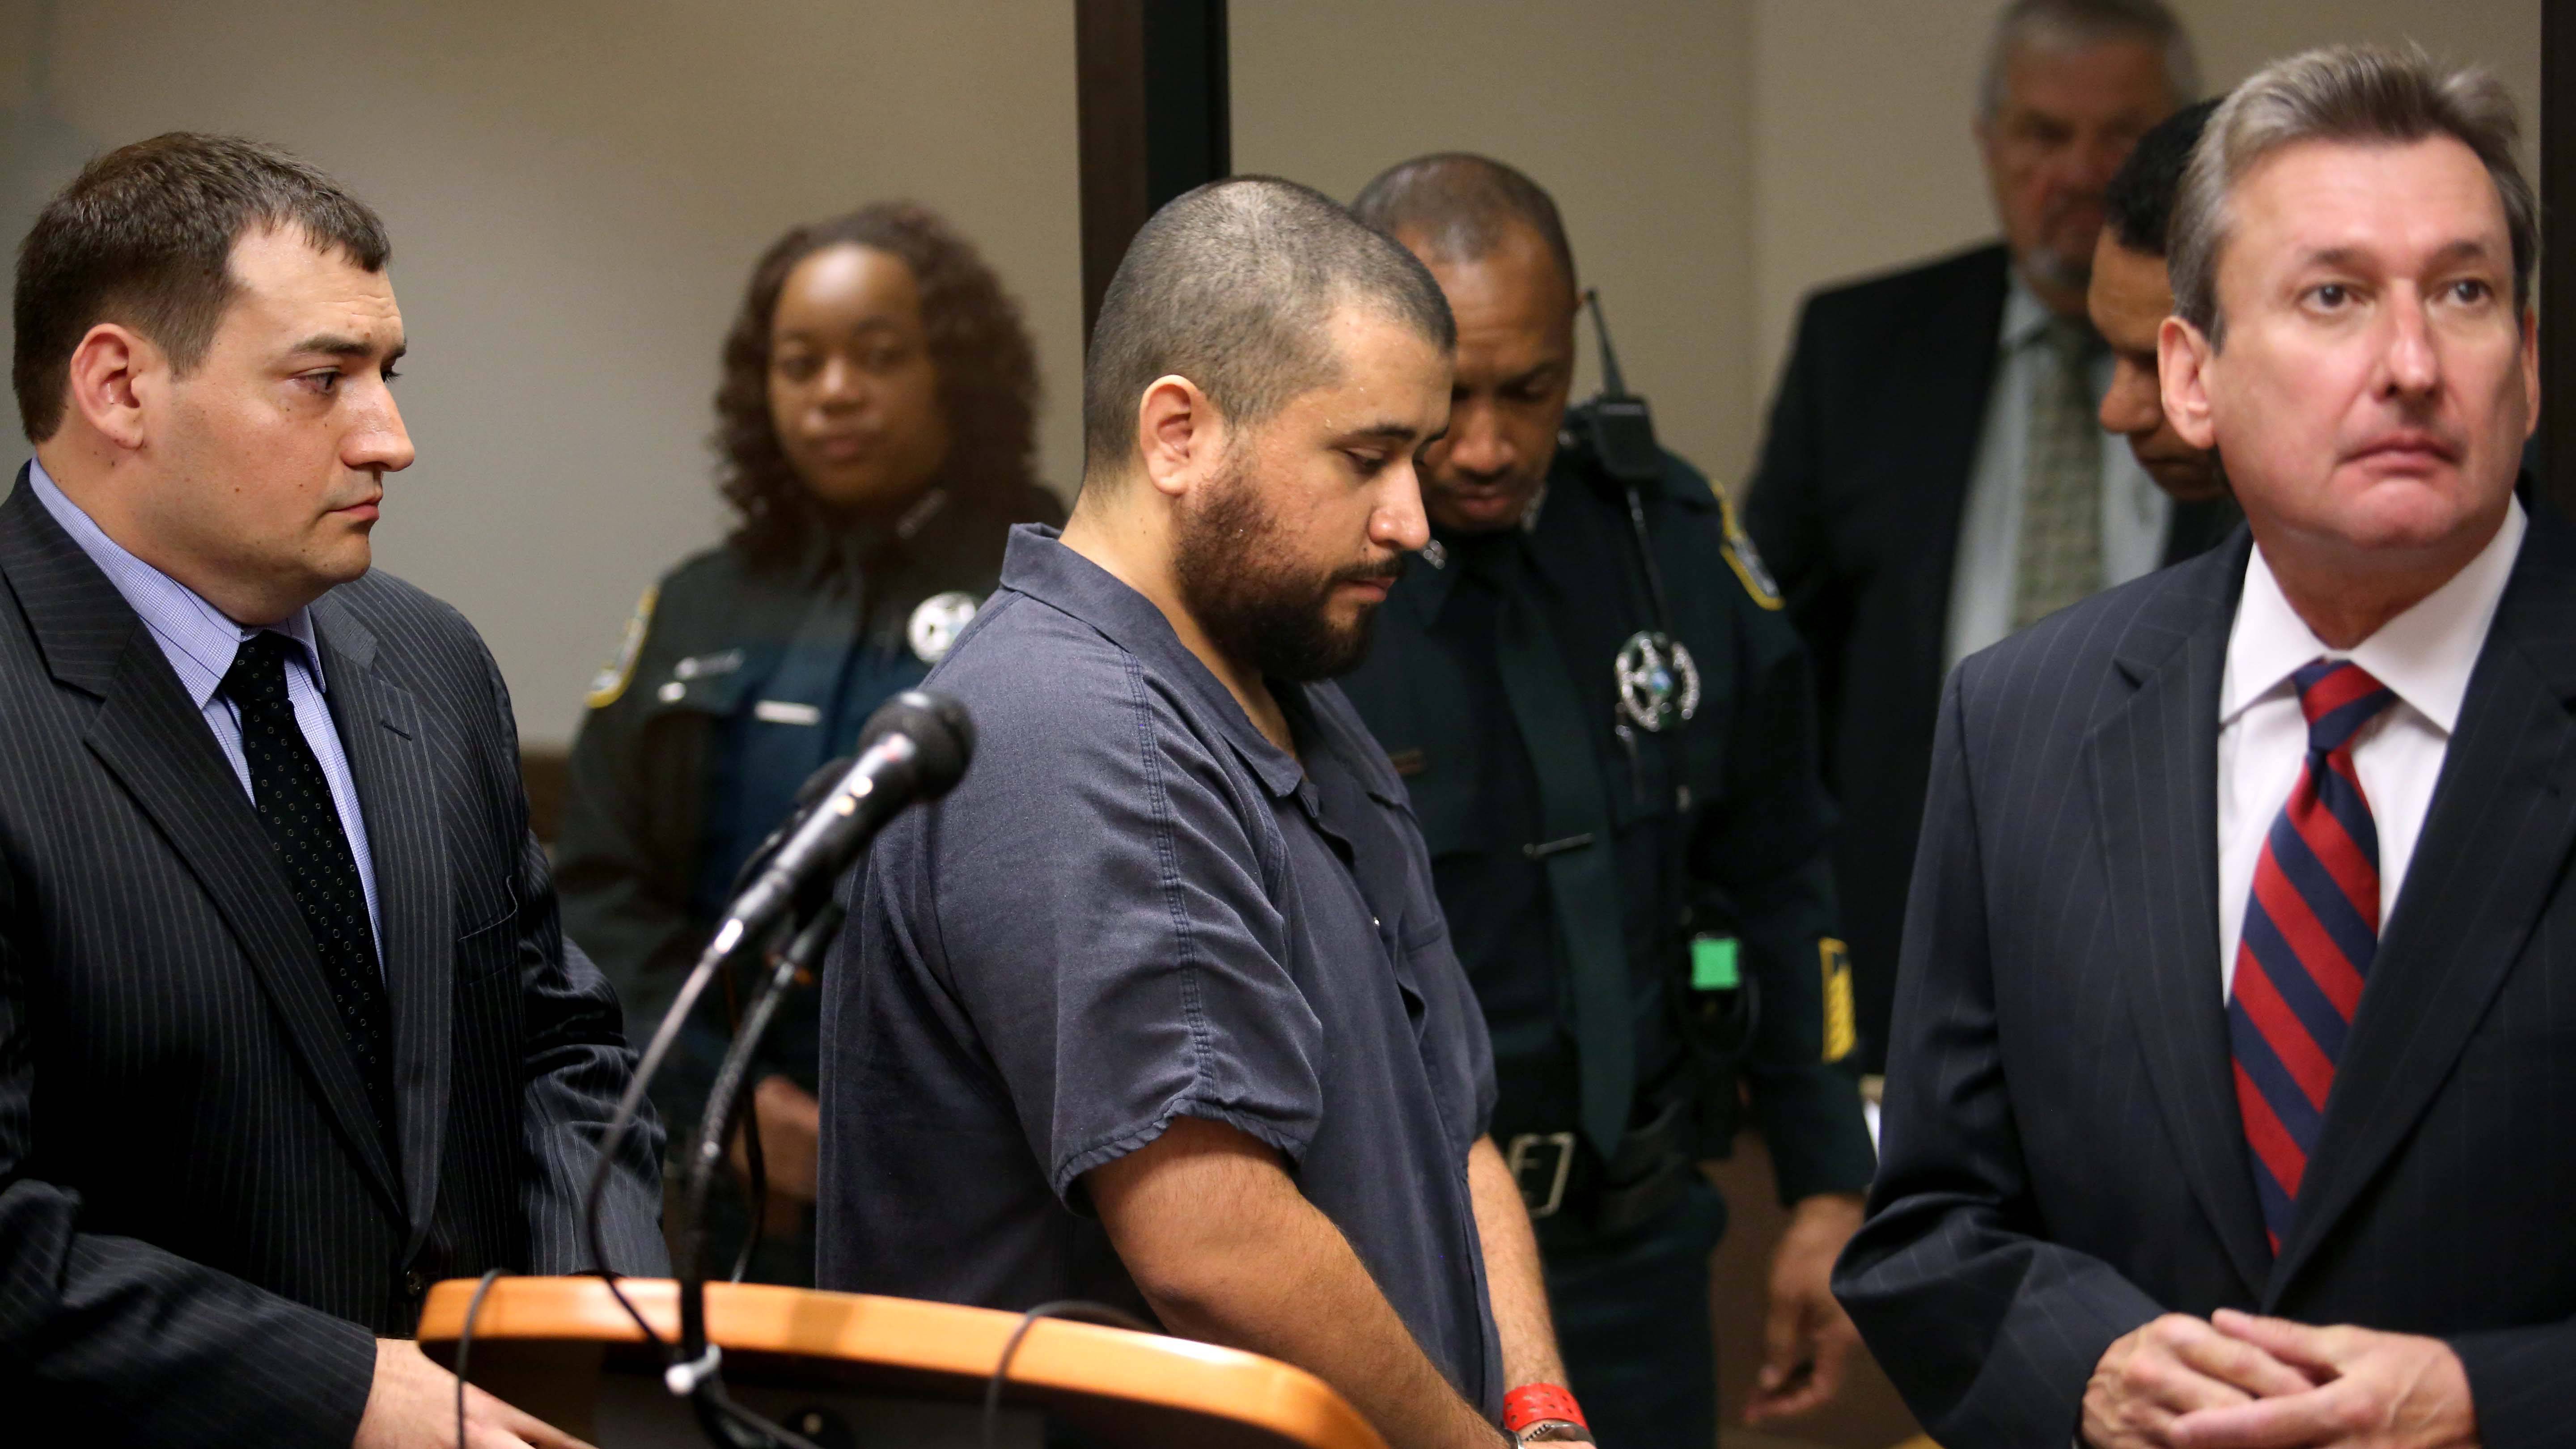 SANFORD, FL - NOVEMBER 19:  George Zimmerman, the acquitted shooter in the death of Trayvon Martin, leaves Courtroom J2 with his defense counsel Daniel Megaro (left) and Jeff Dowdy after a first-appearance hearing on charges including aggravated assault stemming from a fight with his girlfriend November 19, 2013 in Sanford, Florida. Zimmerman, 30, was arrested after police responded to a domestic disturbance call at a house. He was acquitted in July of all charges in the shooting death of unarmed, black teenager, Trayvon Martin.   (Photo by Joe Burbank-Pool/Getty Images)